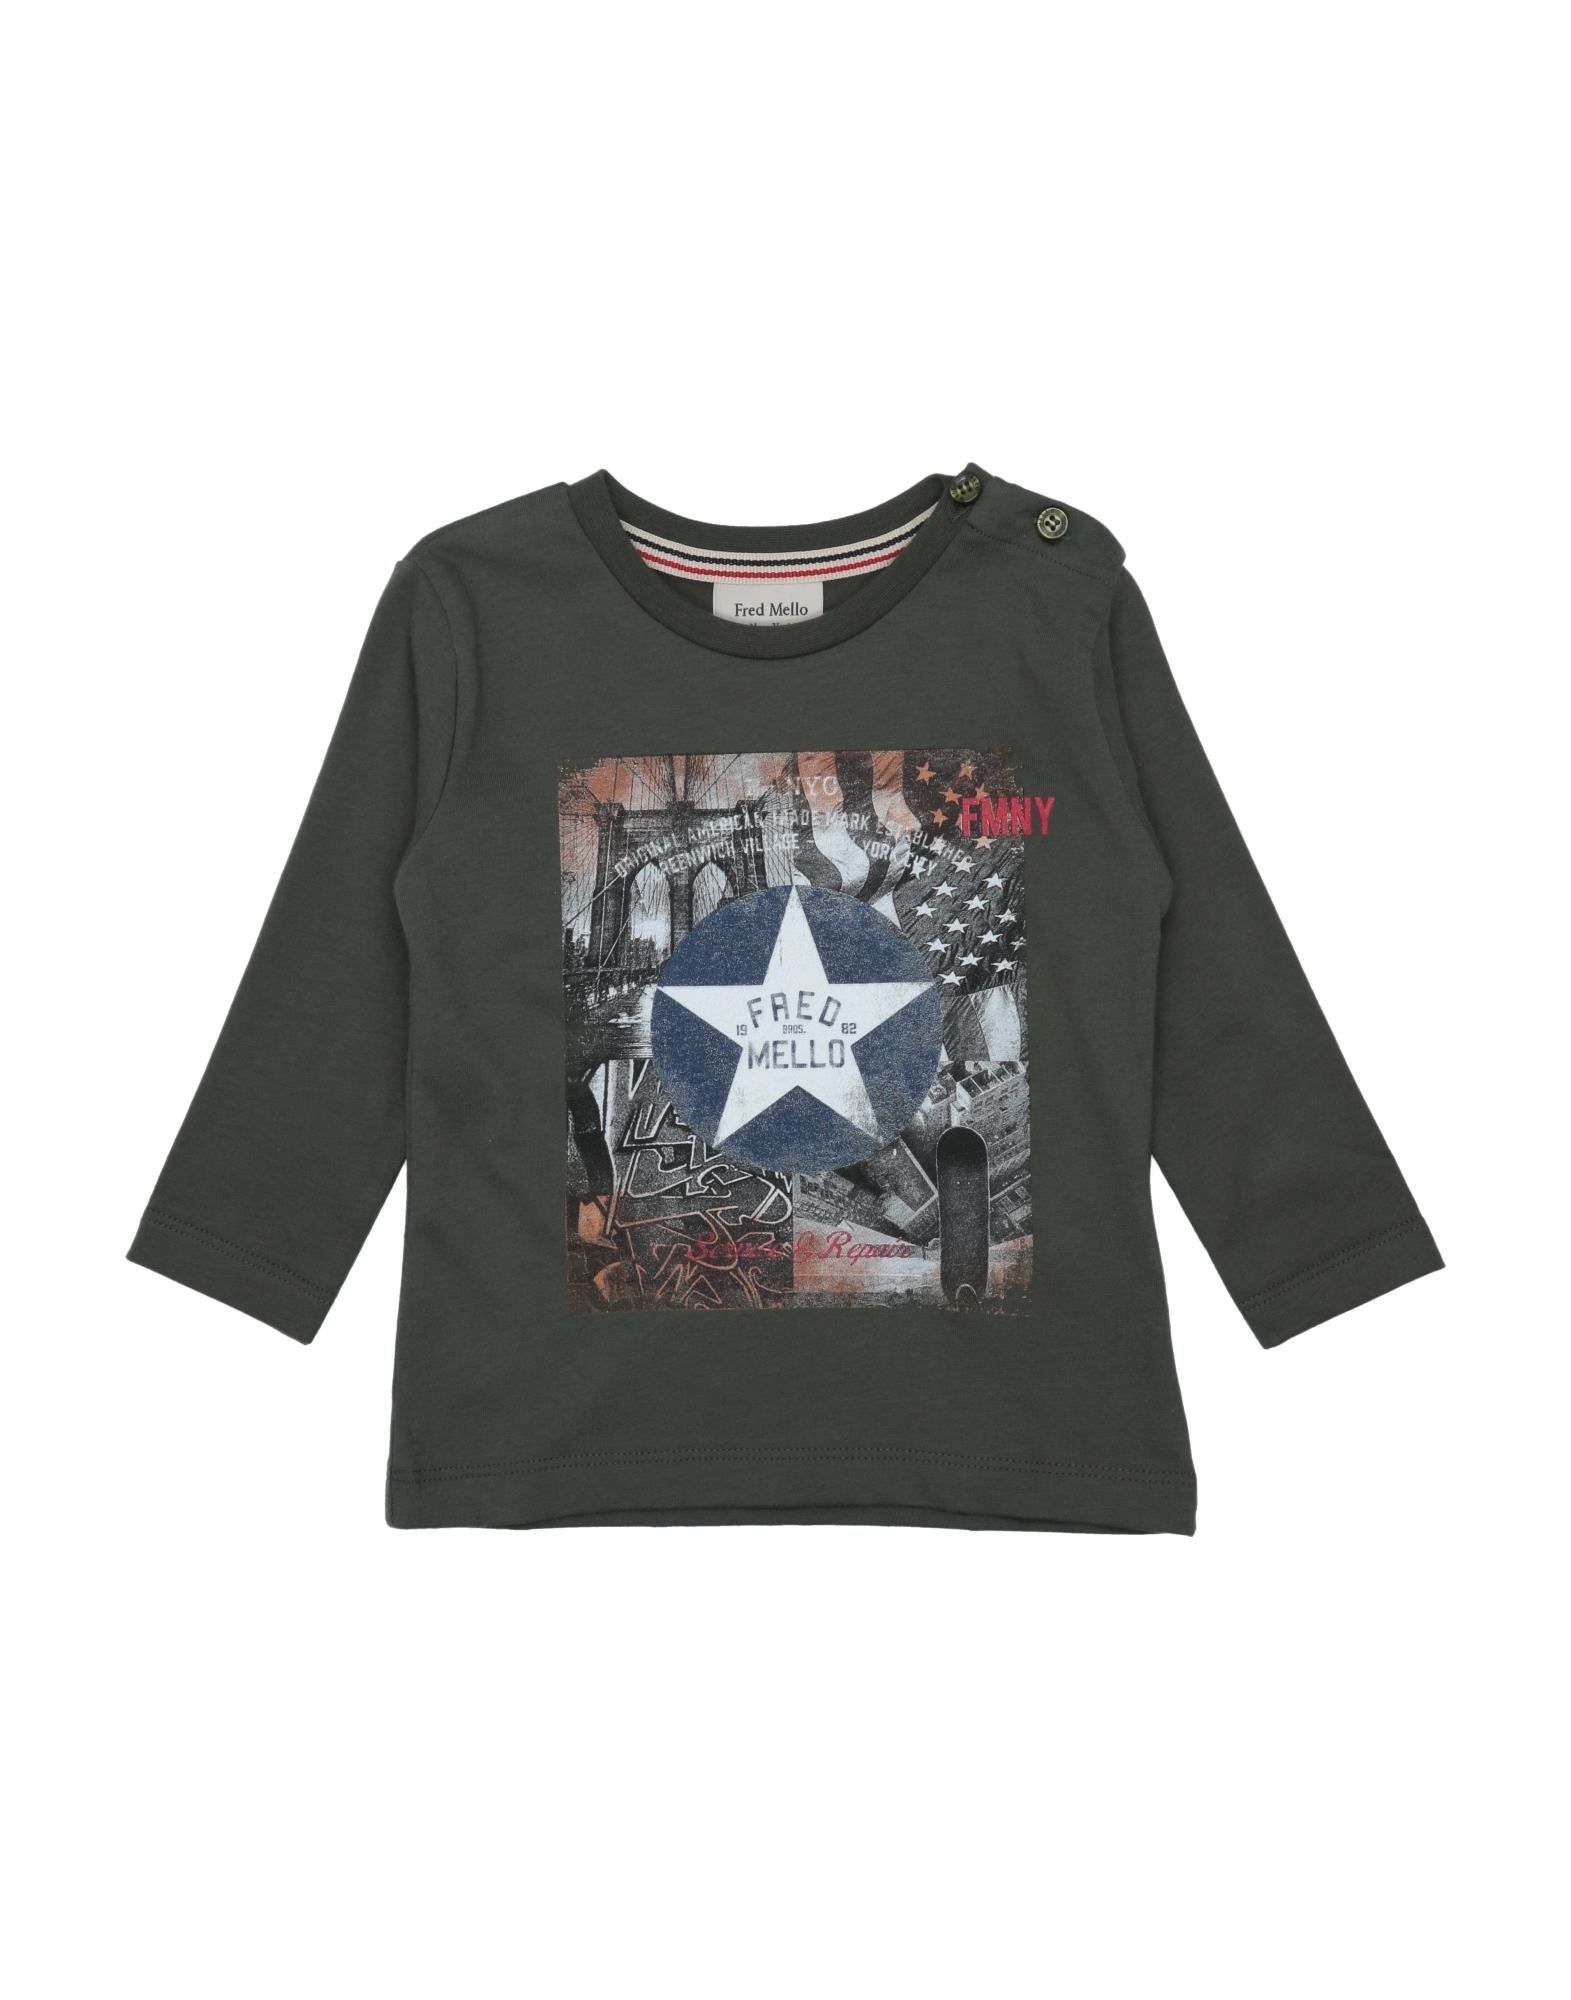 Fred Mello Kids' T-shirts In Military Green